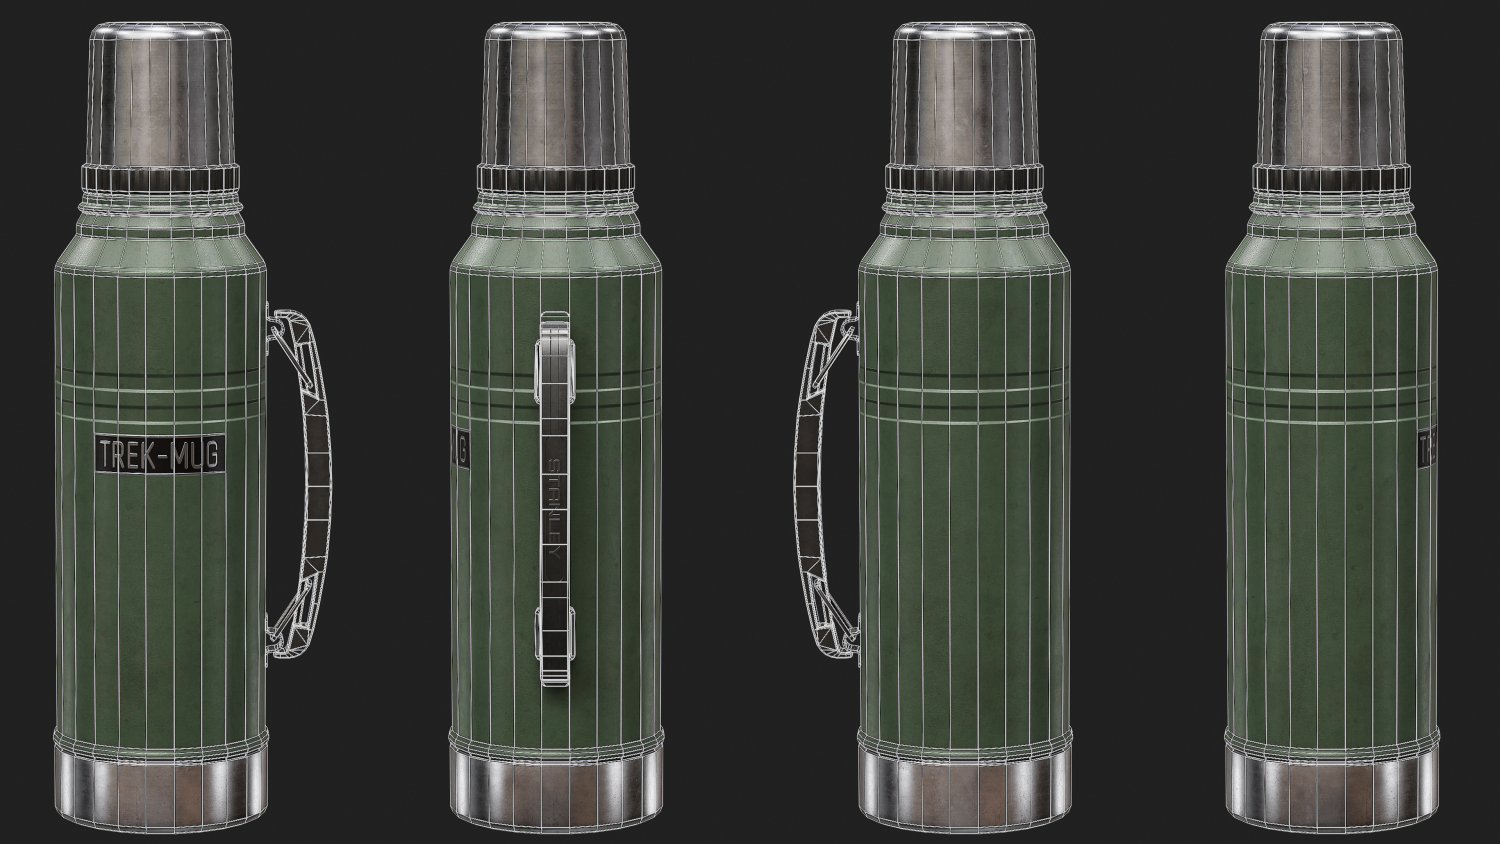 Camping Thermos 3D Model in Sports Equipment 3DExport